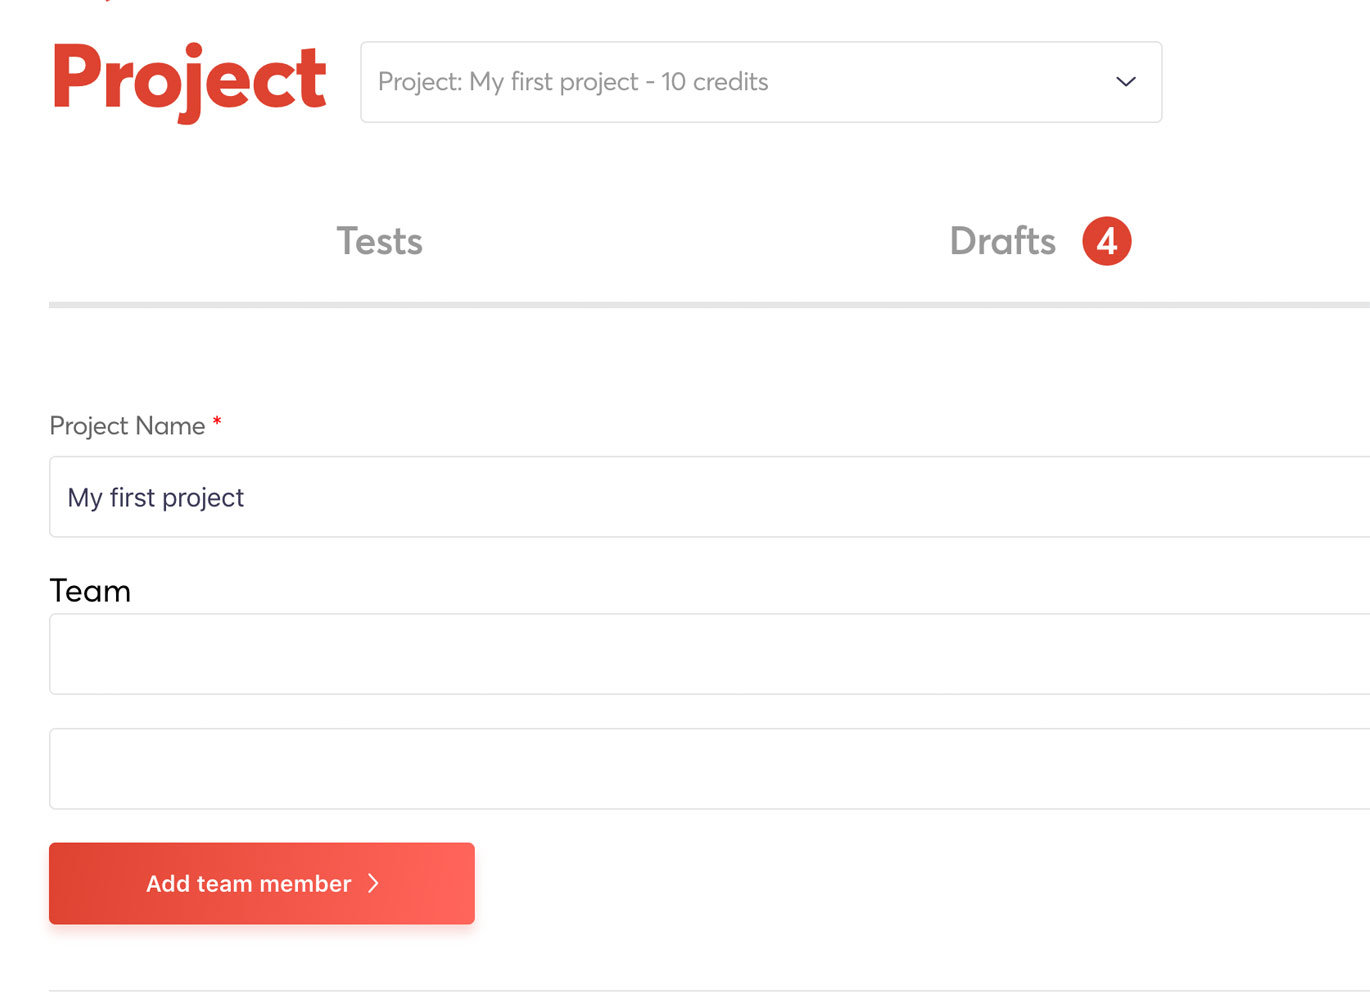 Invite team members into your project